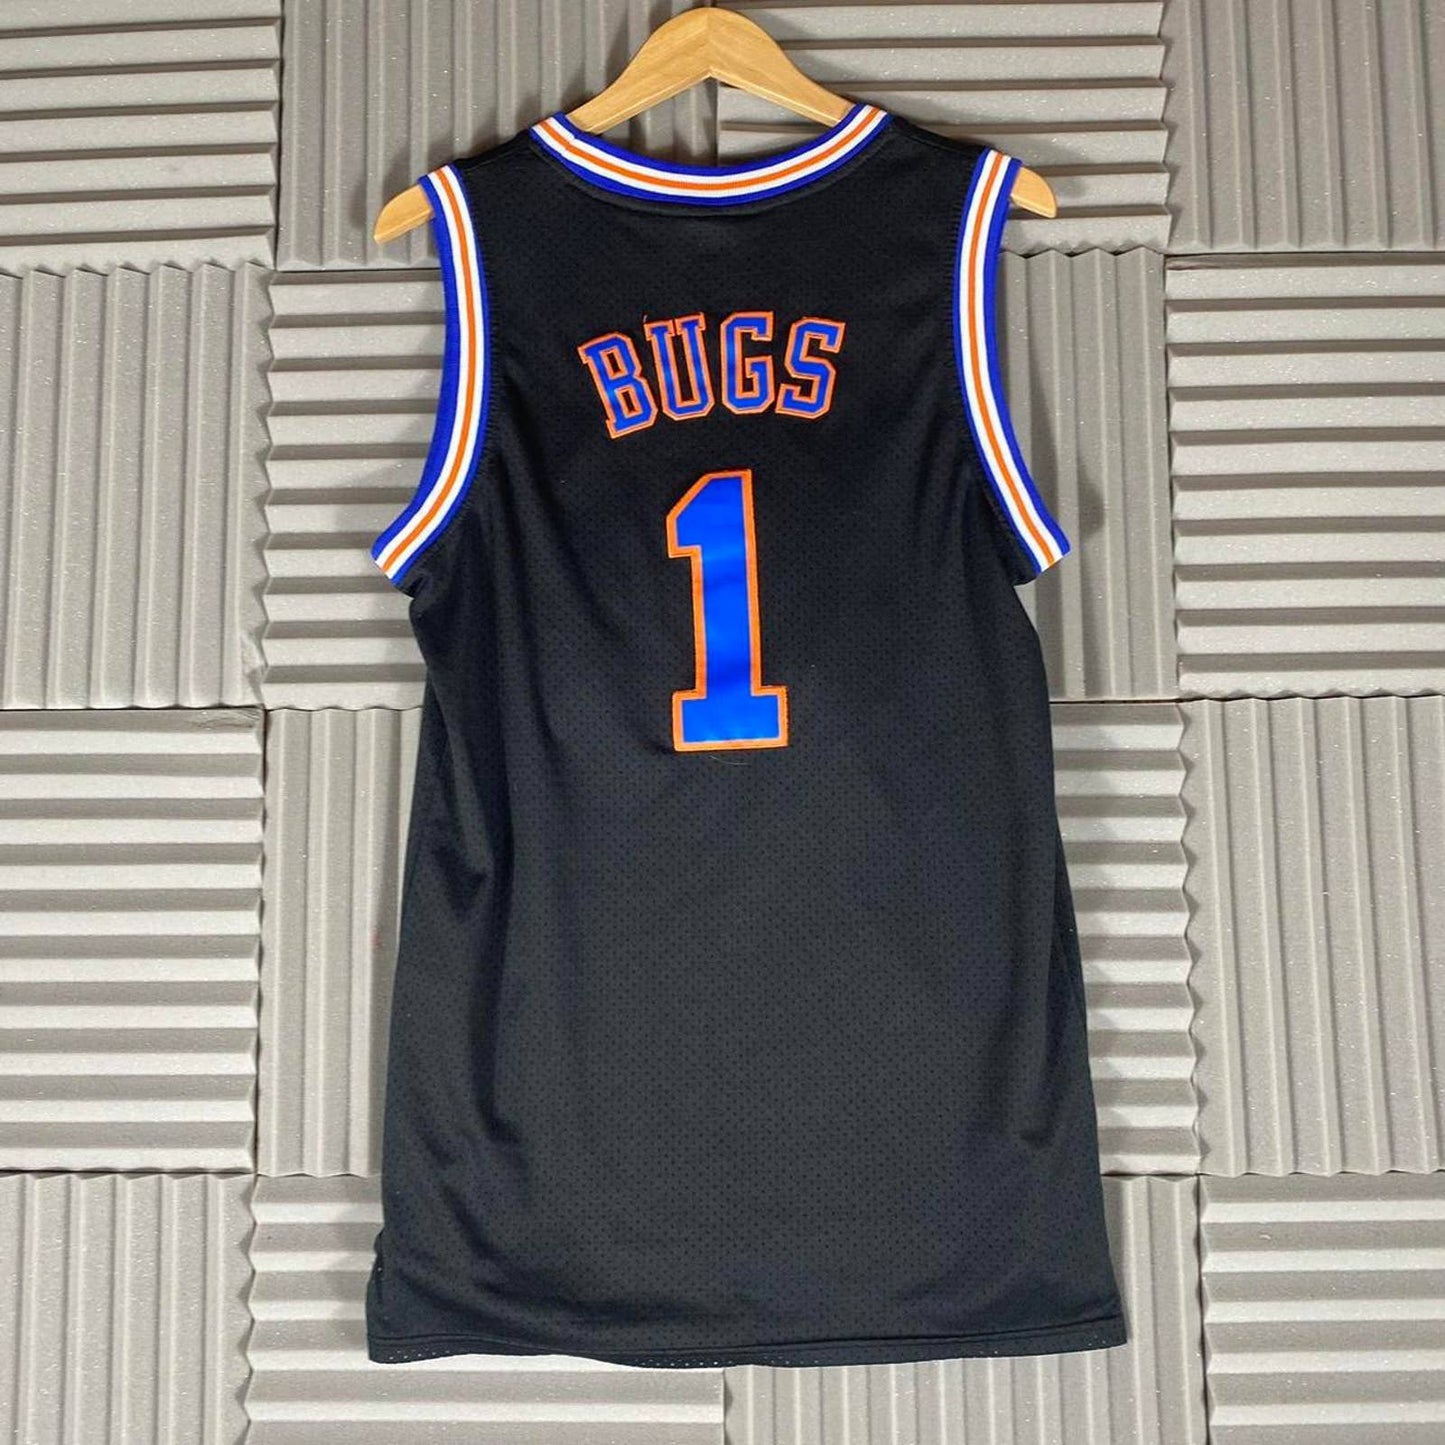 (S) Tune Squad Looney Tunes Basketball Jersey